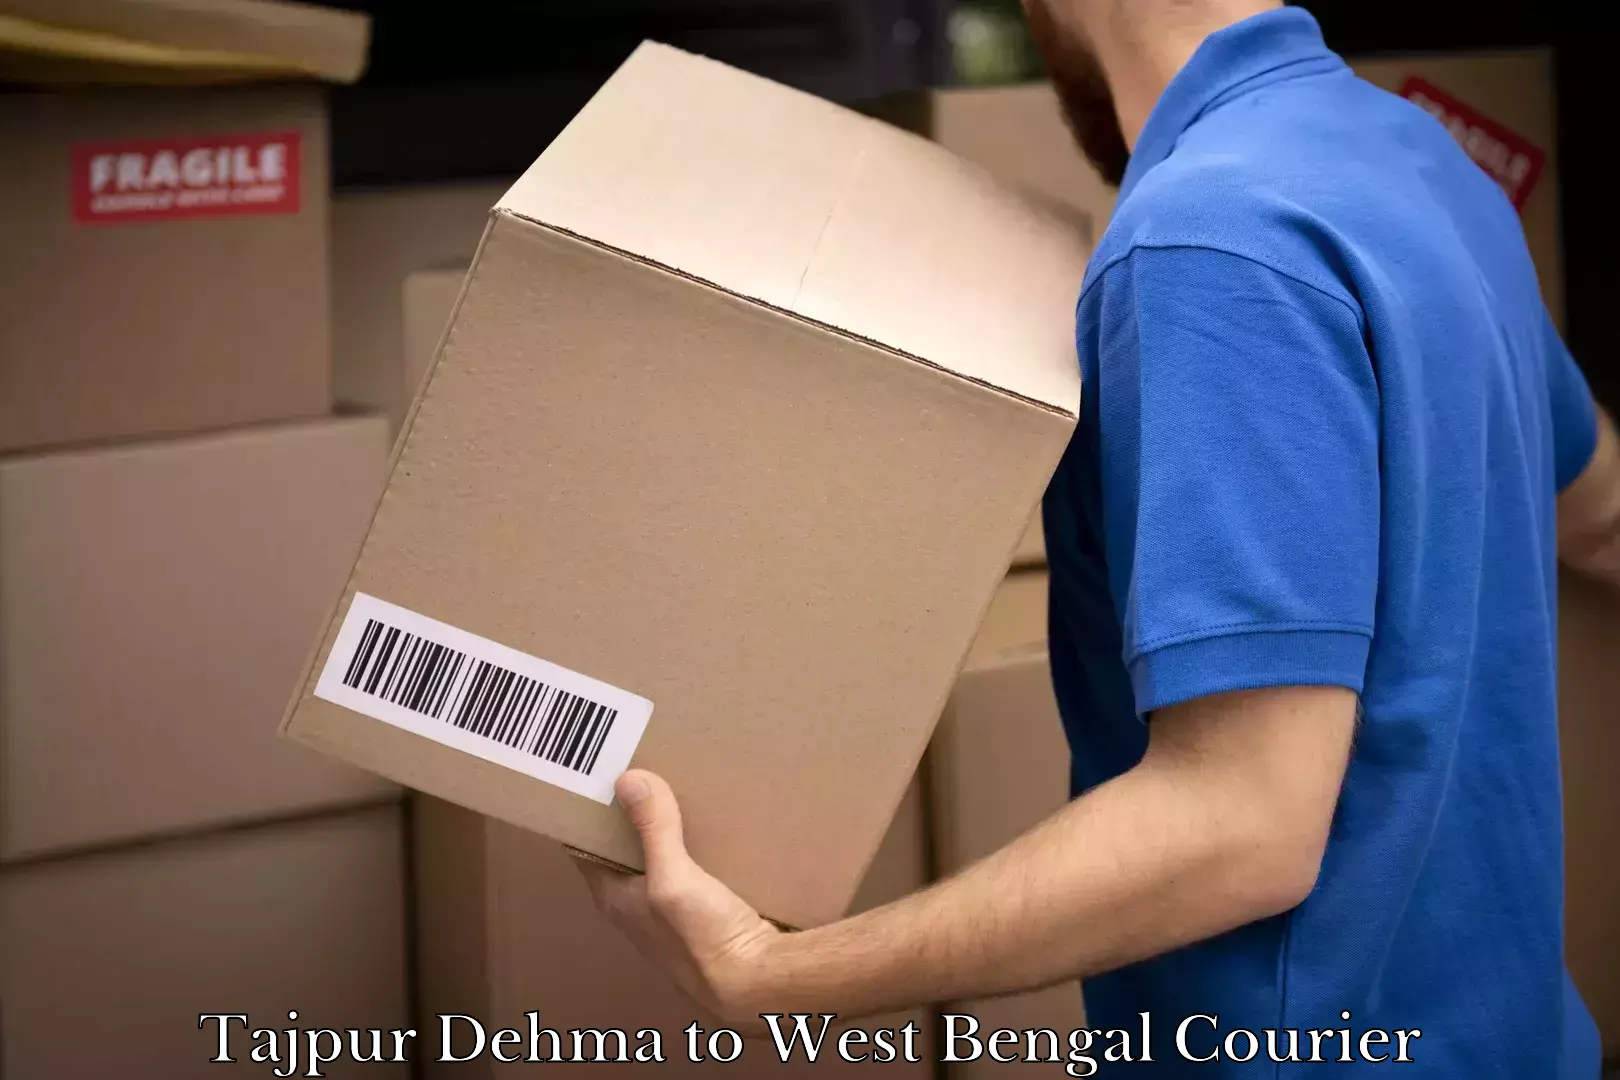 Corporate courier solutions Tajpur Dehma to West Bengal